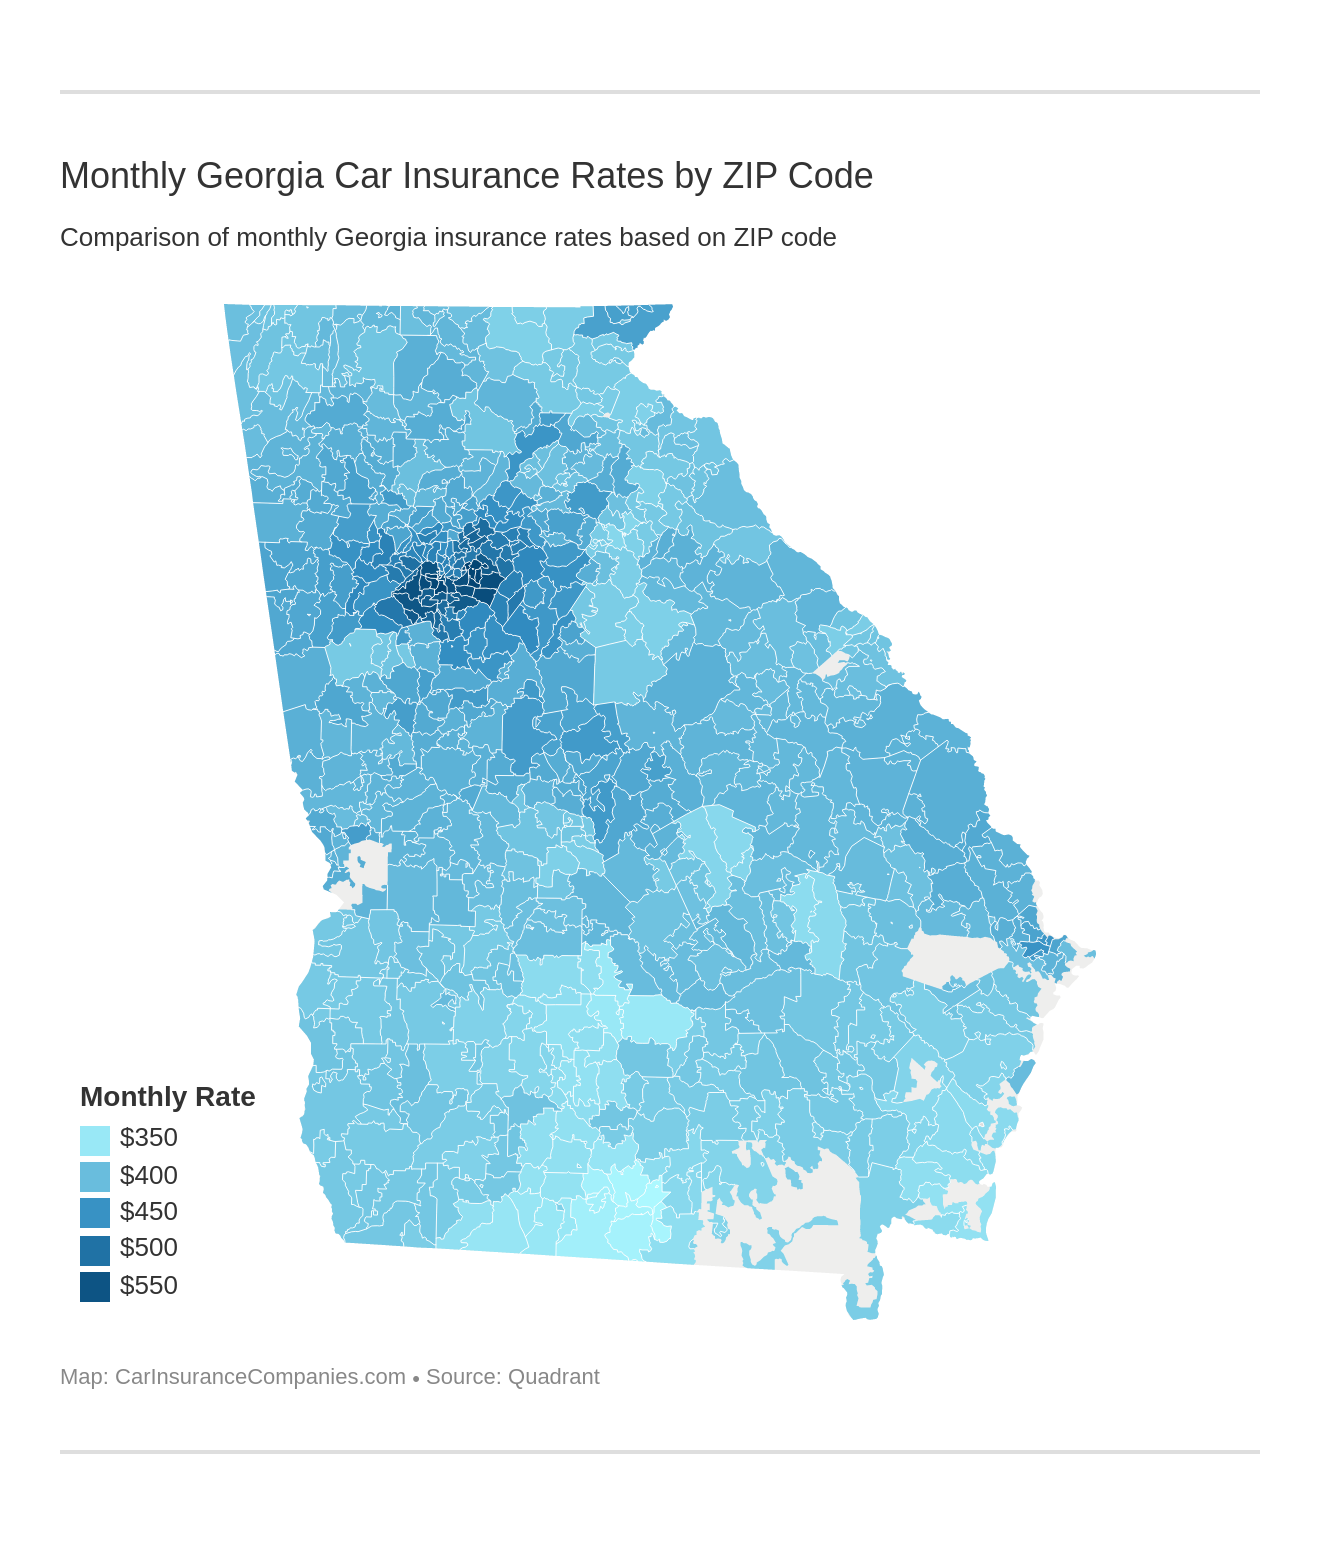 Monthly Georgia Car Insurance Rates by ZIP Code